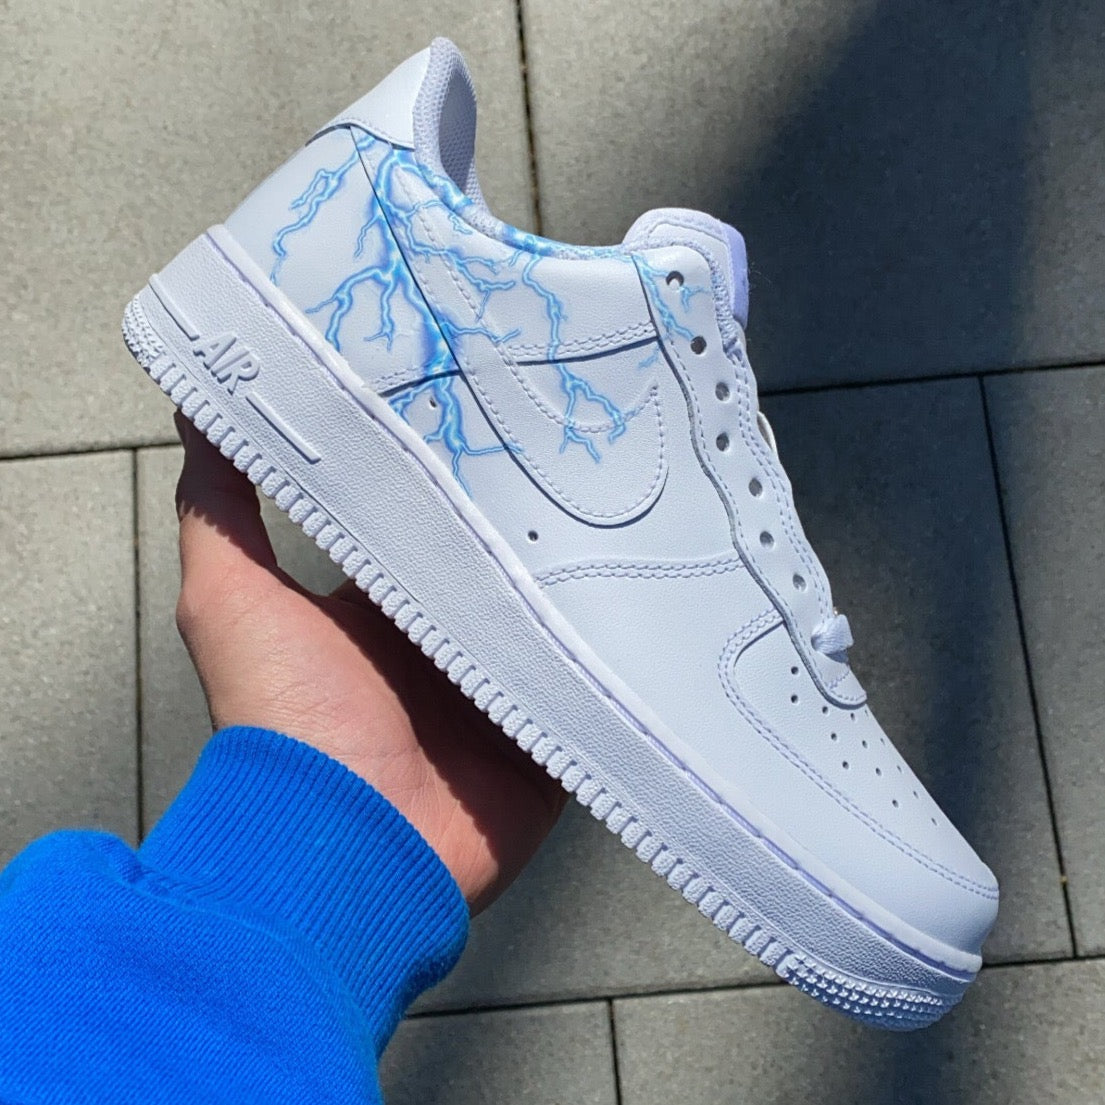 reflective lightning air force 1